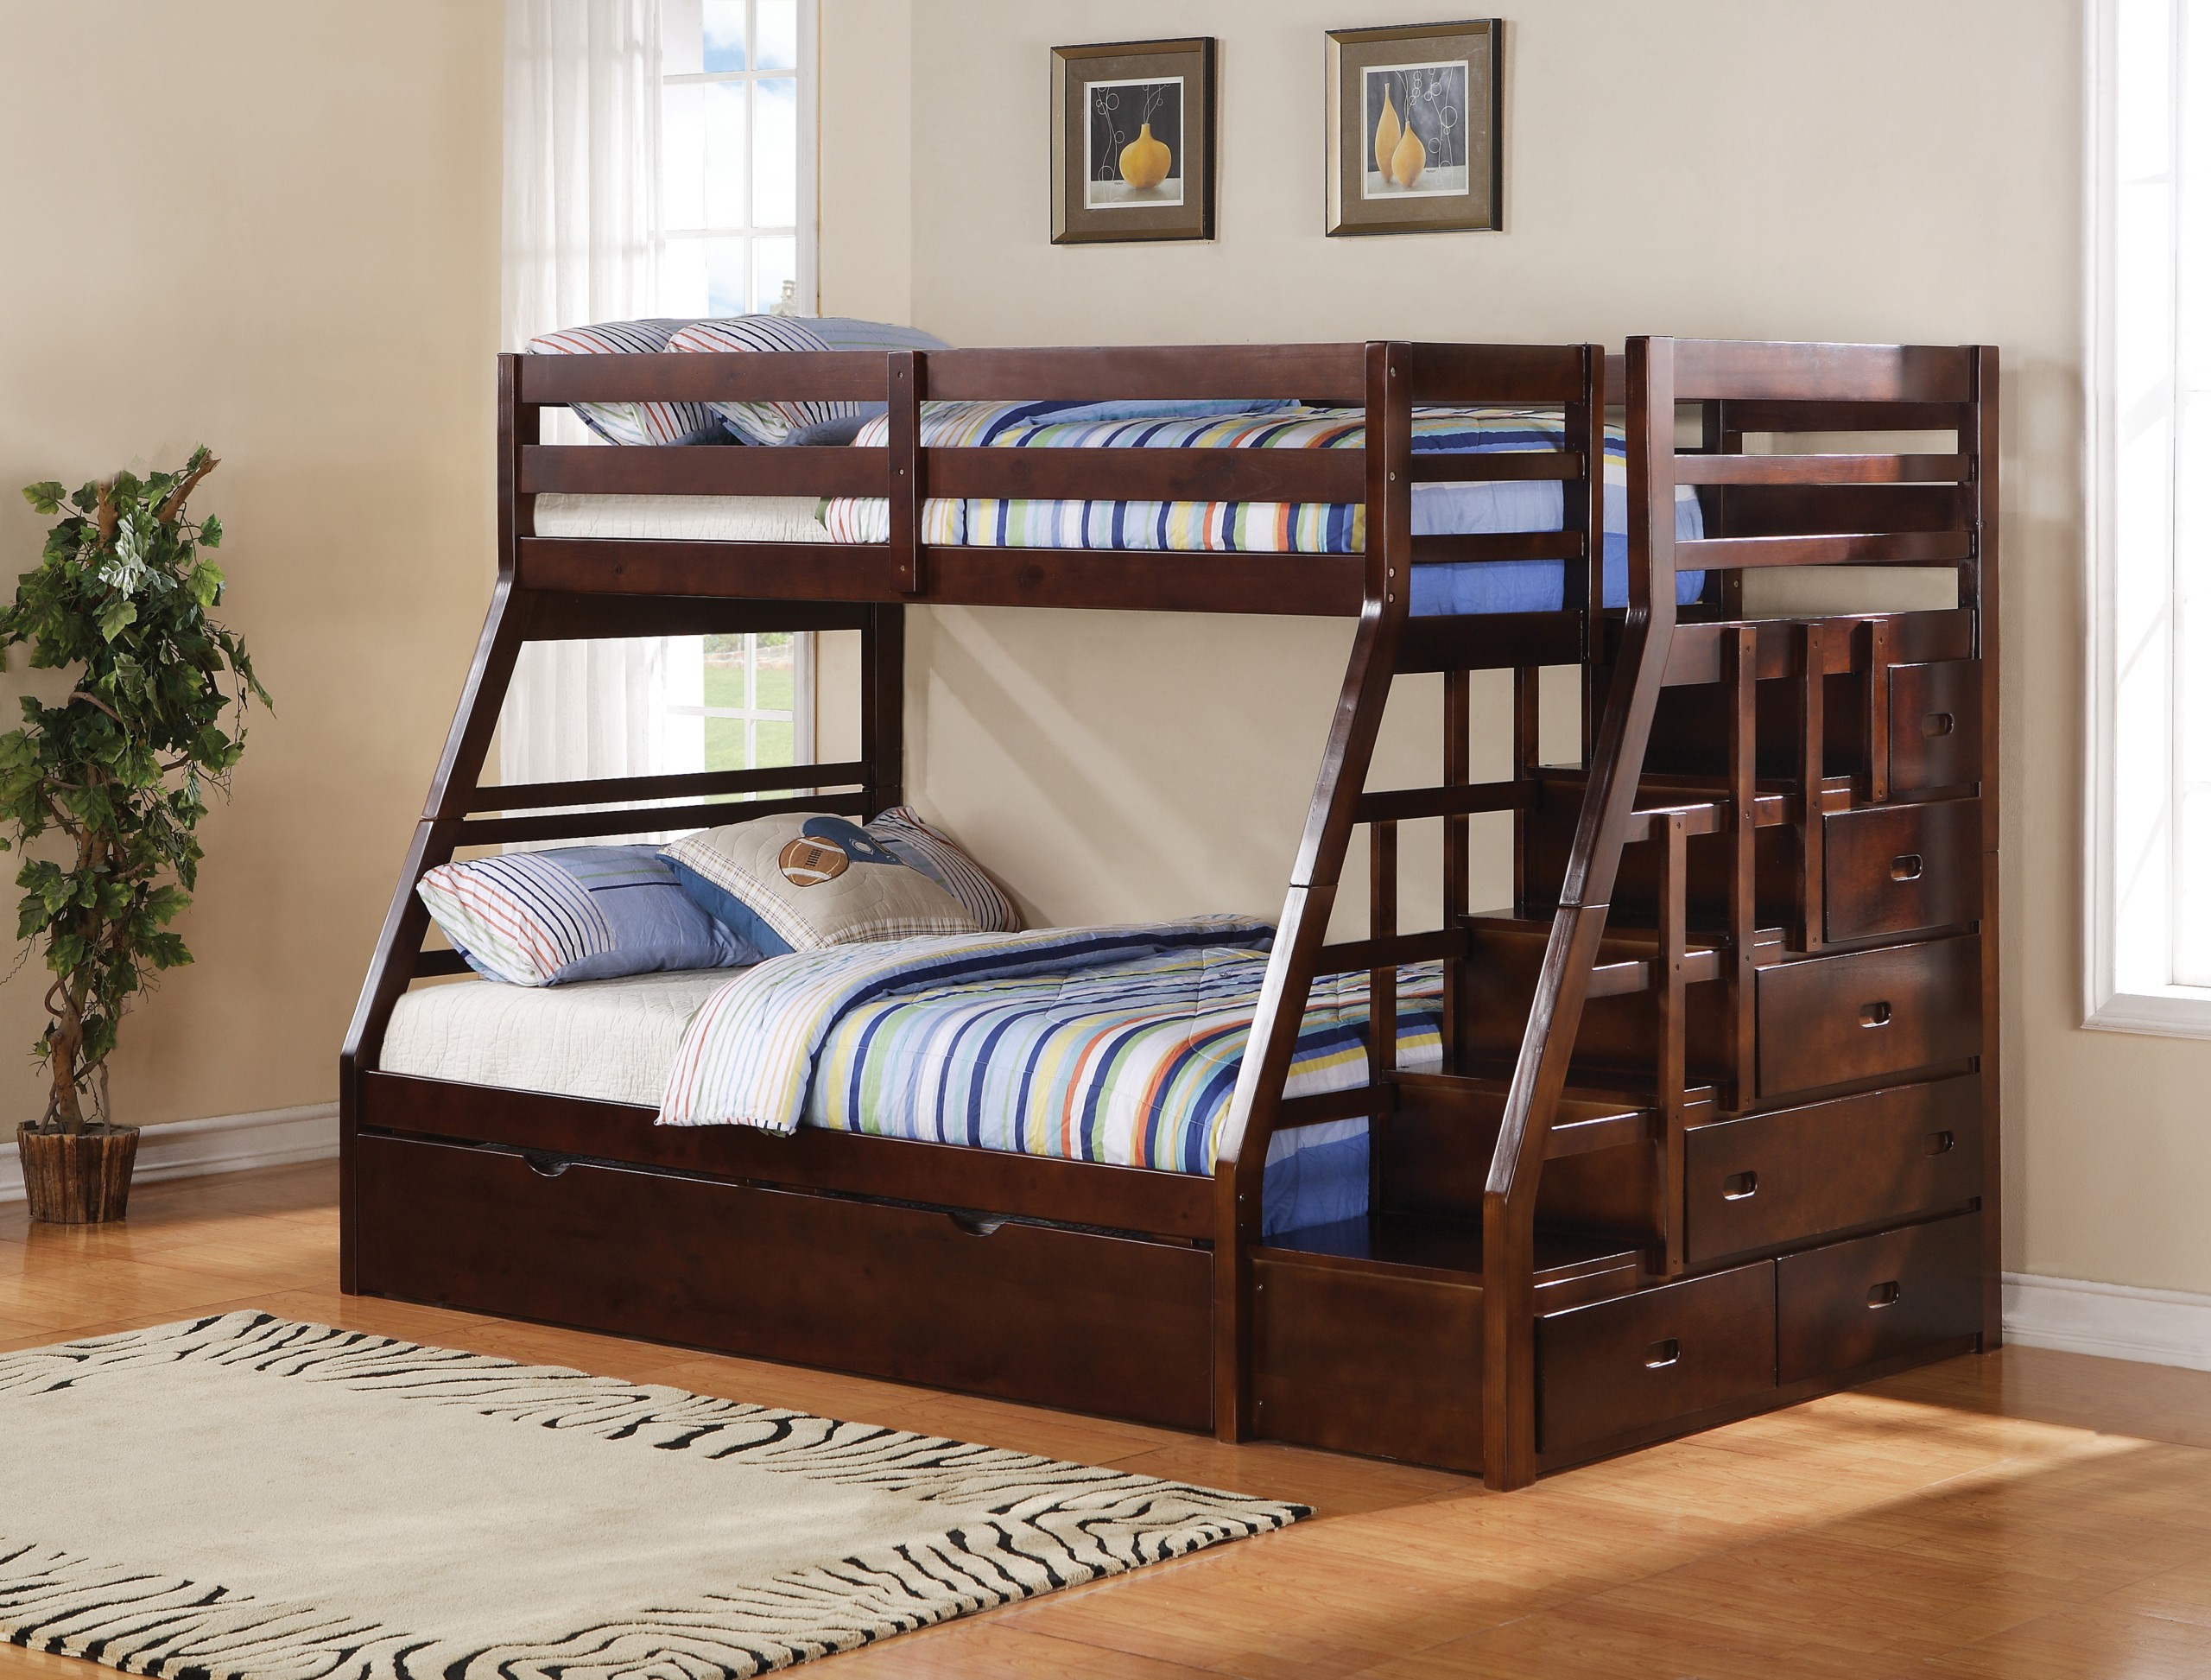 Jason espresso twin over full bunk bed with storage ladder